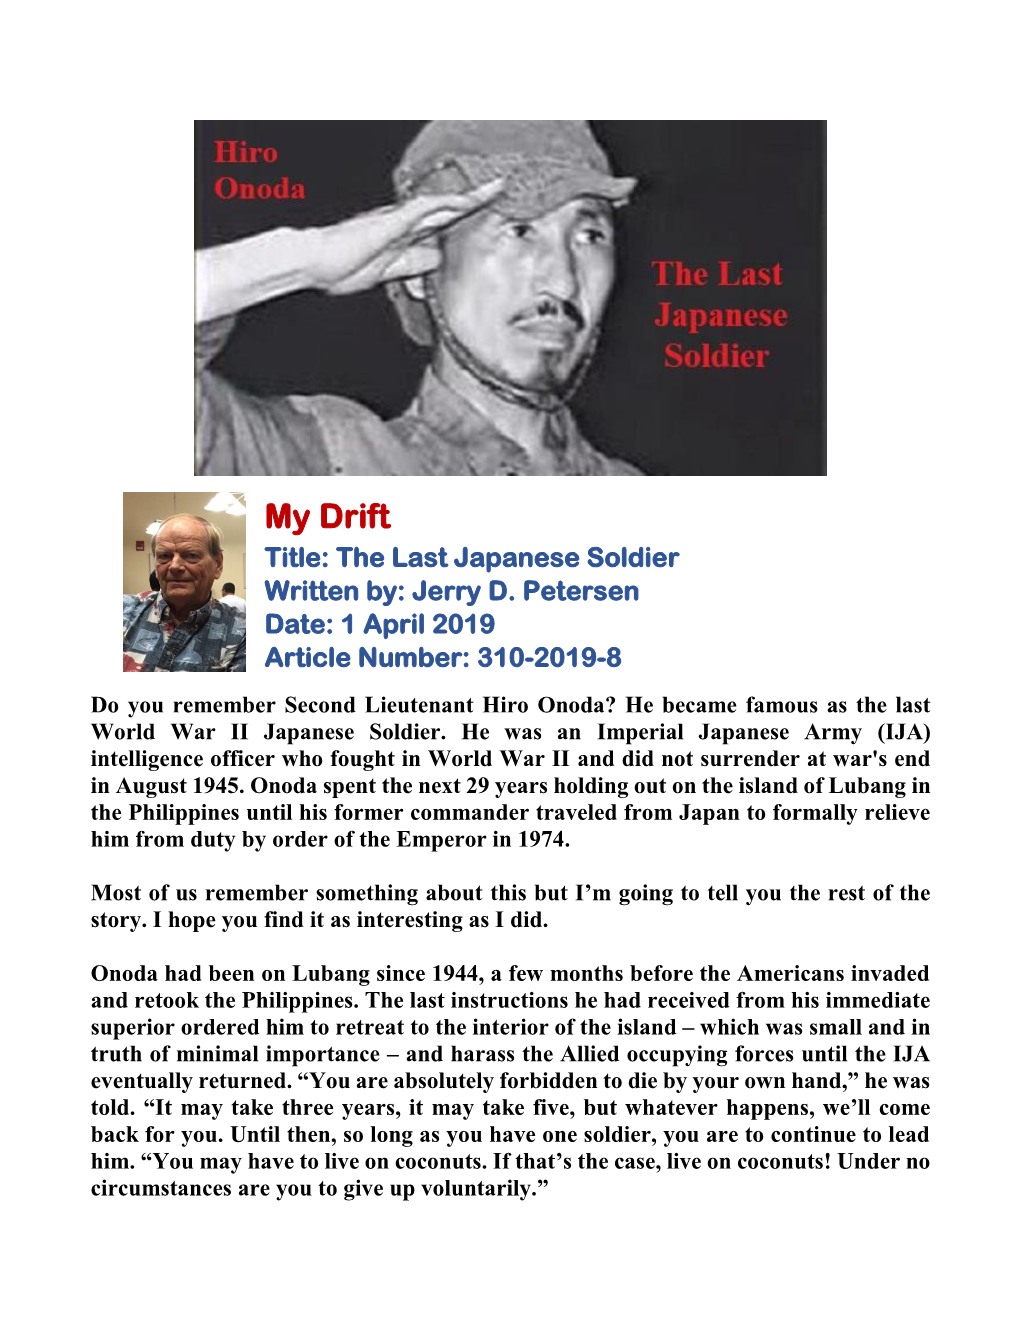 My Drift Title: the Last Japanese Soldier Written By: Jerry D